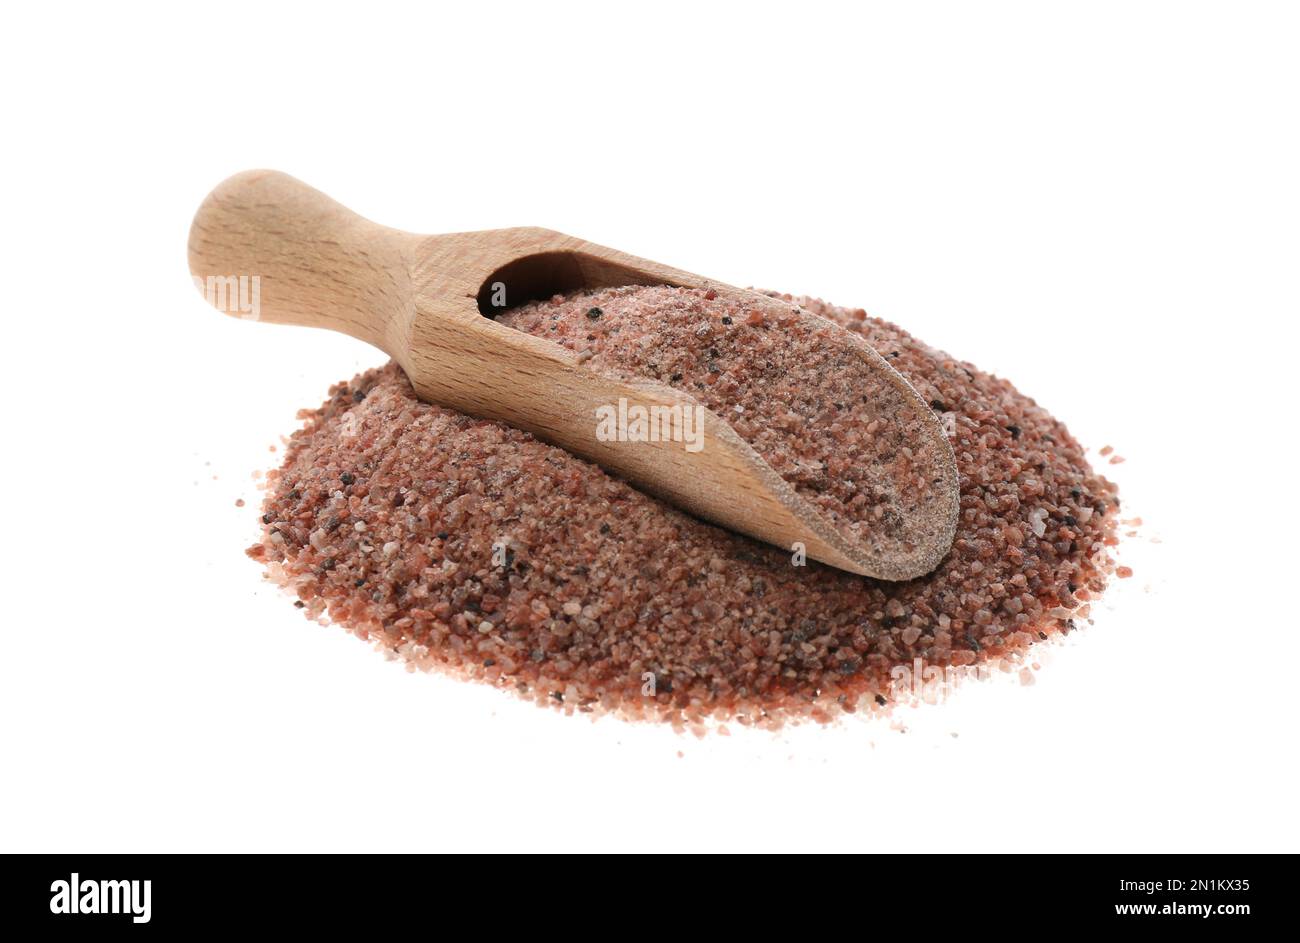 Pile of ground black salt with wooden scoop isolated on white Stock Photo